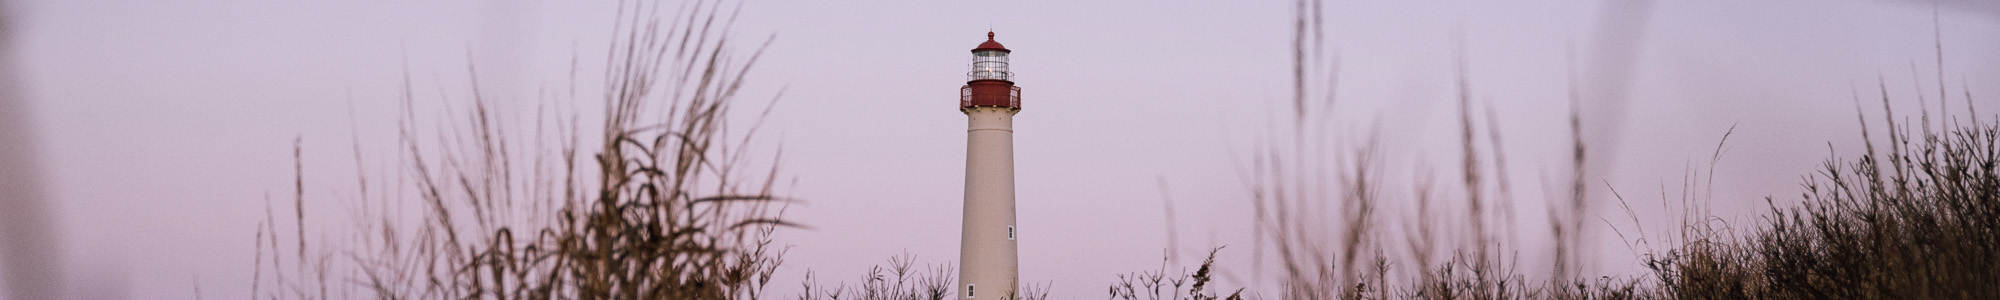 Cape May Point Lighthouse Historic Site